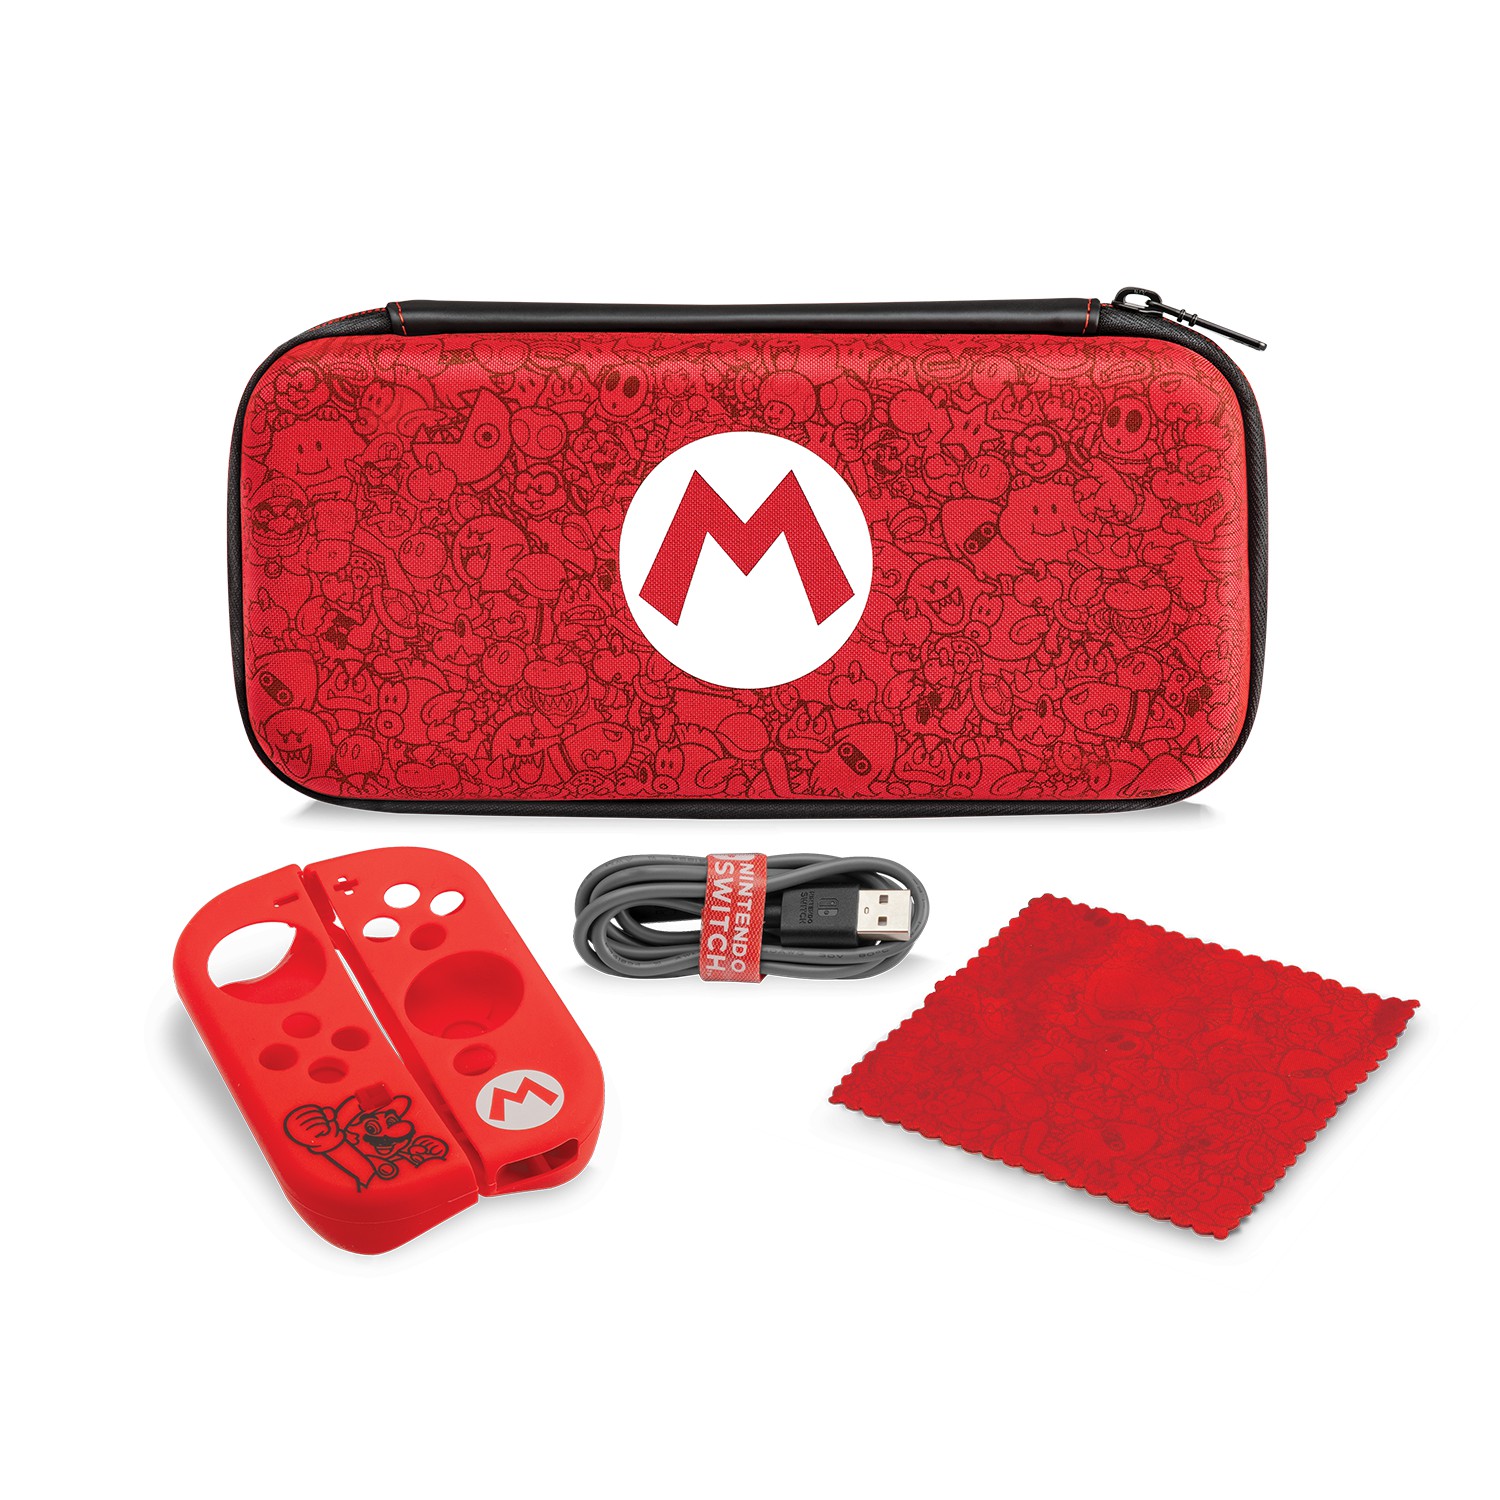 PDP Starter Kit - Mario Remix Edition For Nintendo Switch